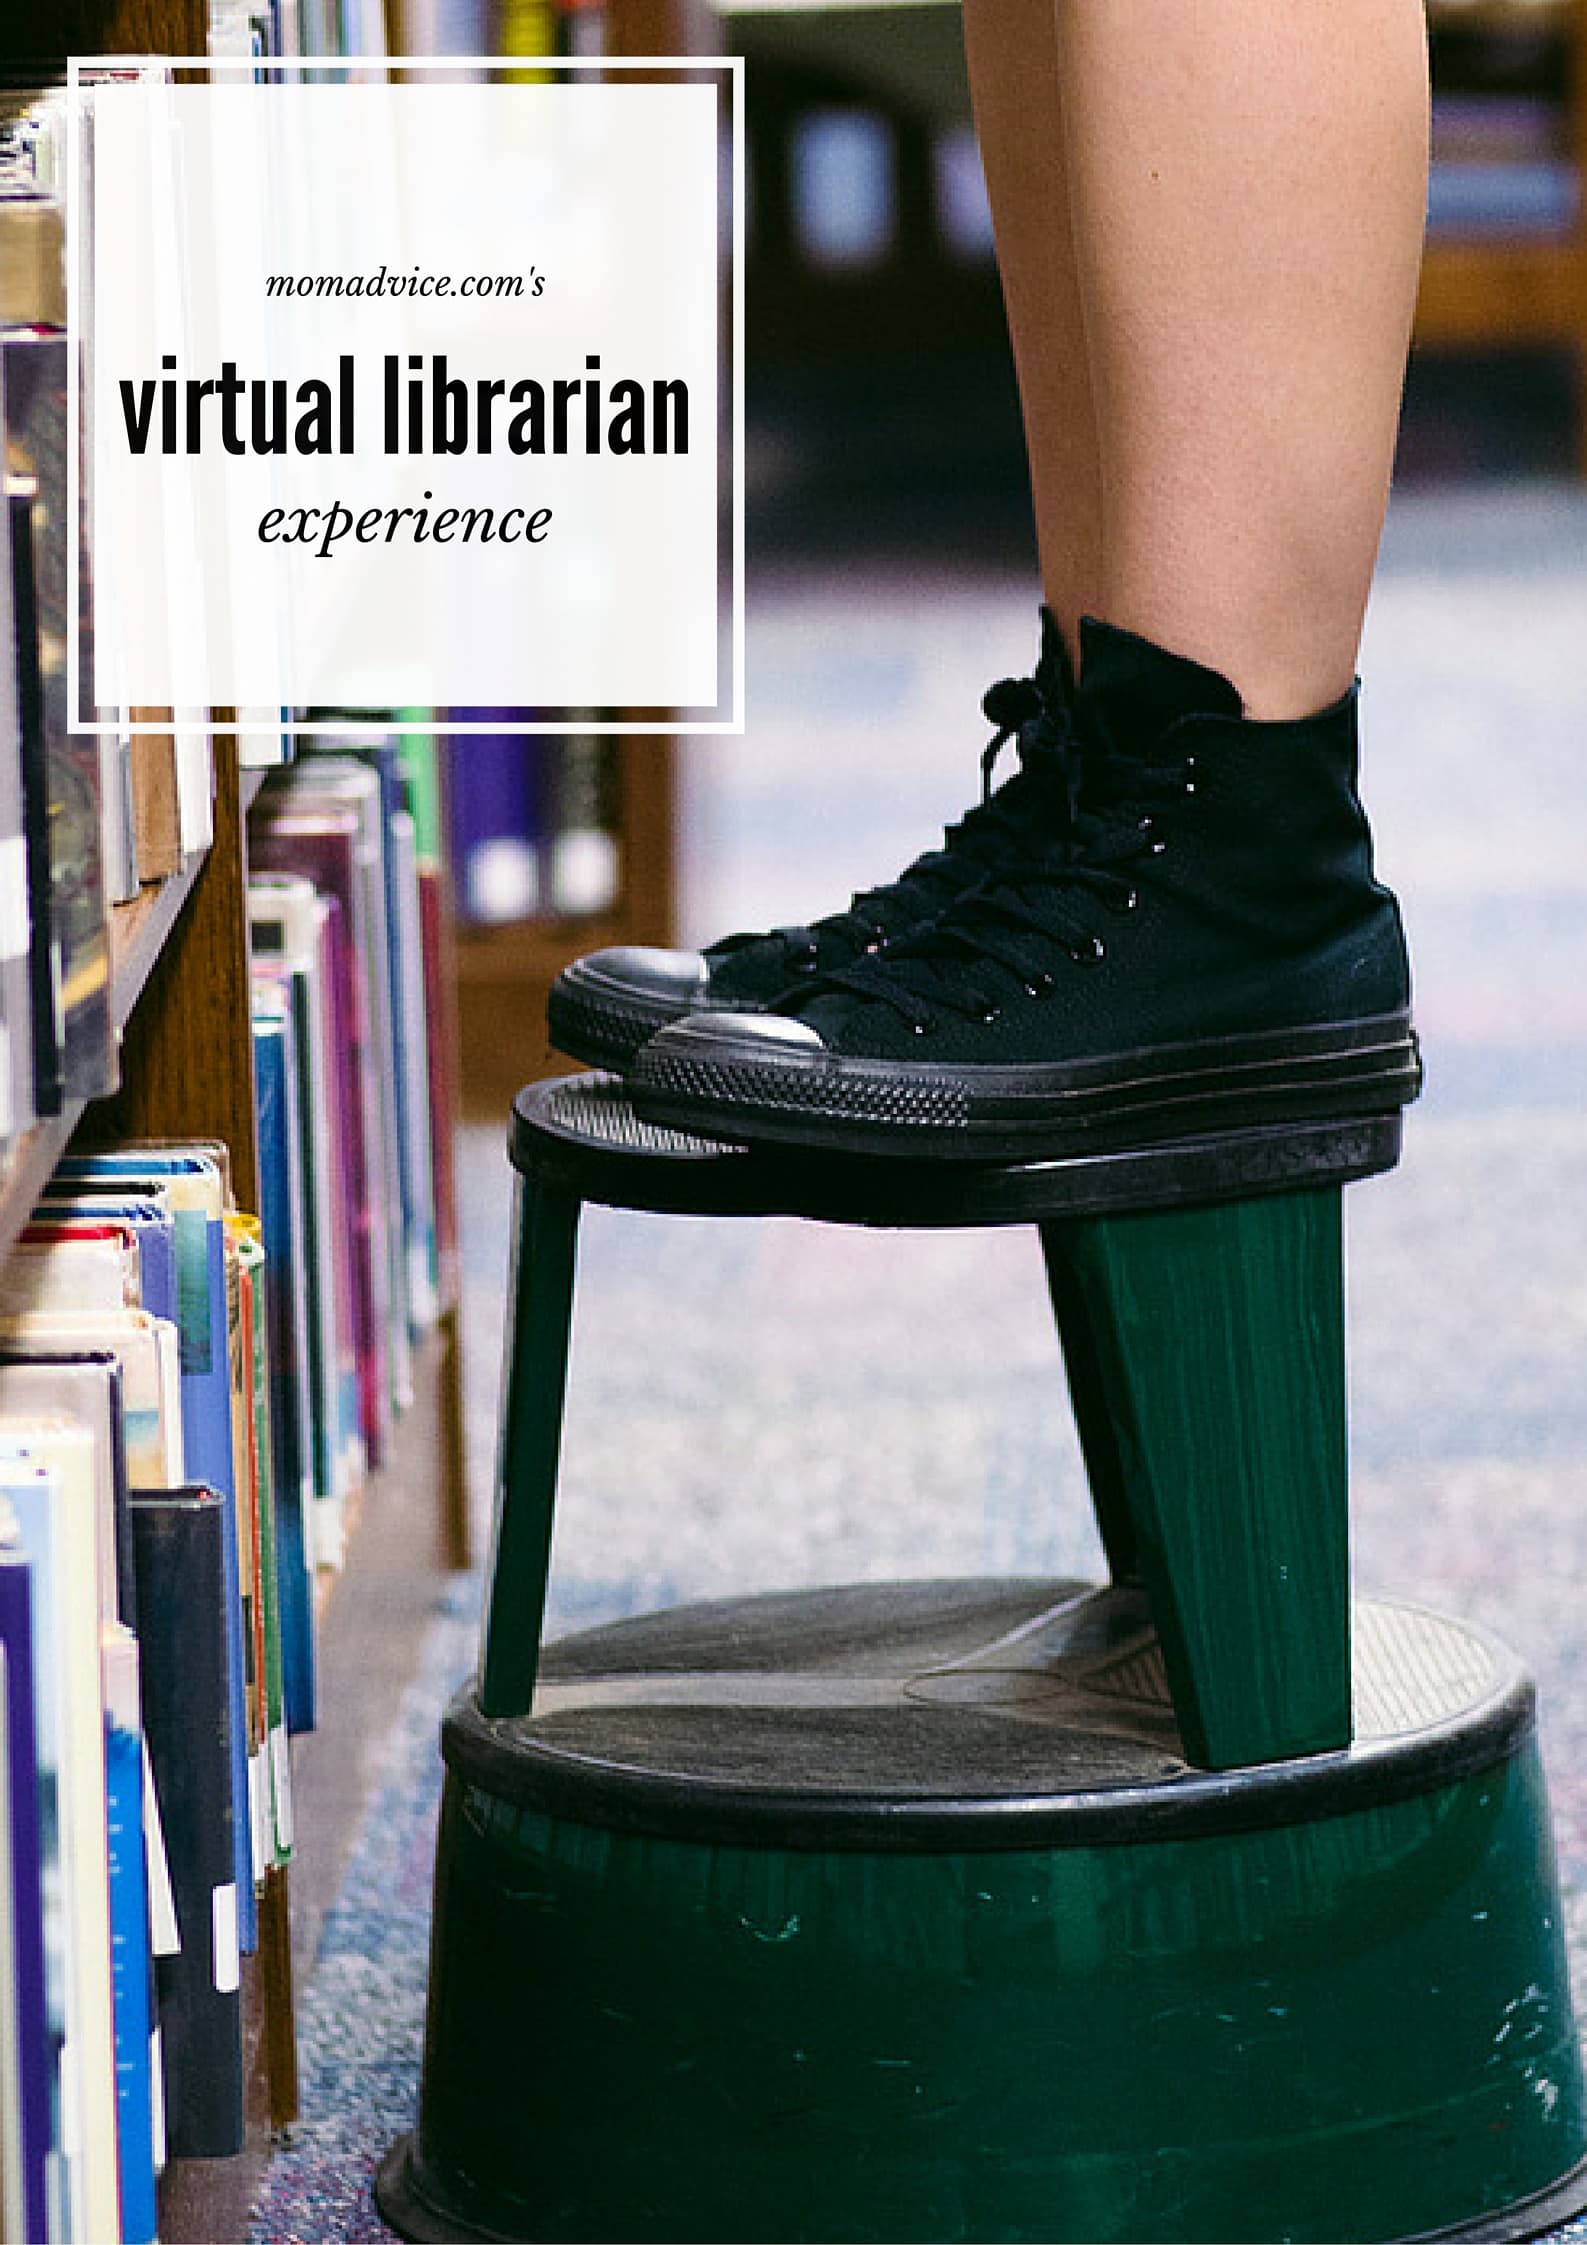 The Virtual Librarian Experience: Keep it Clean and Inspiring